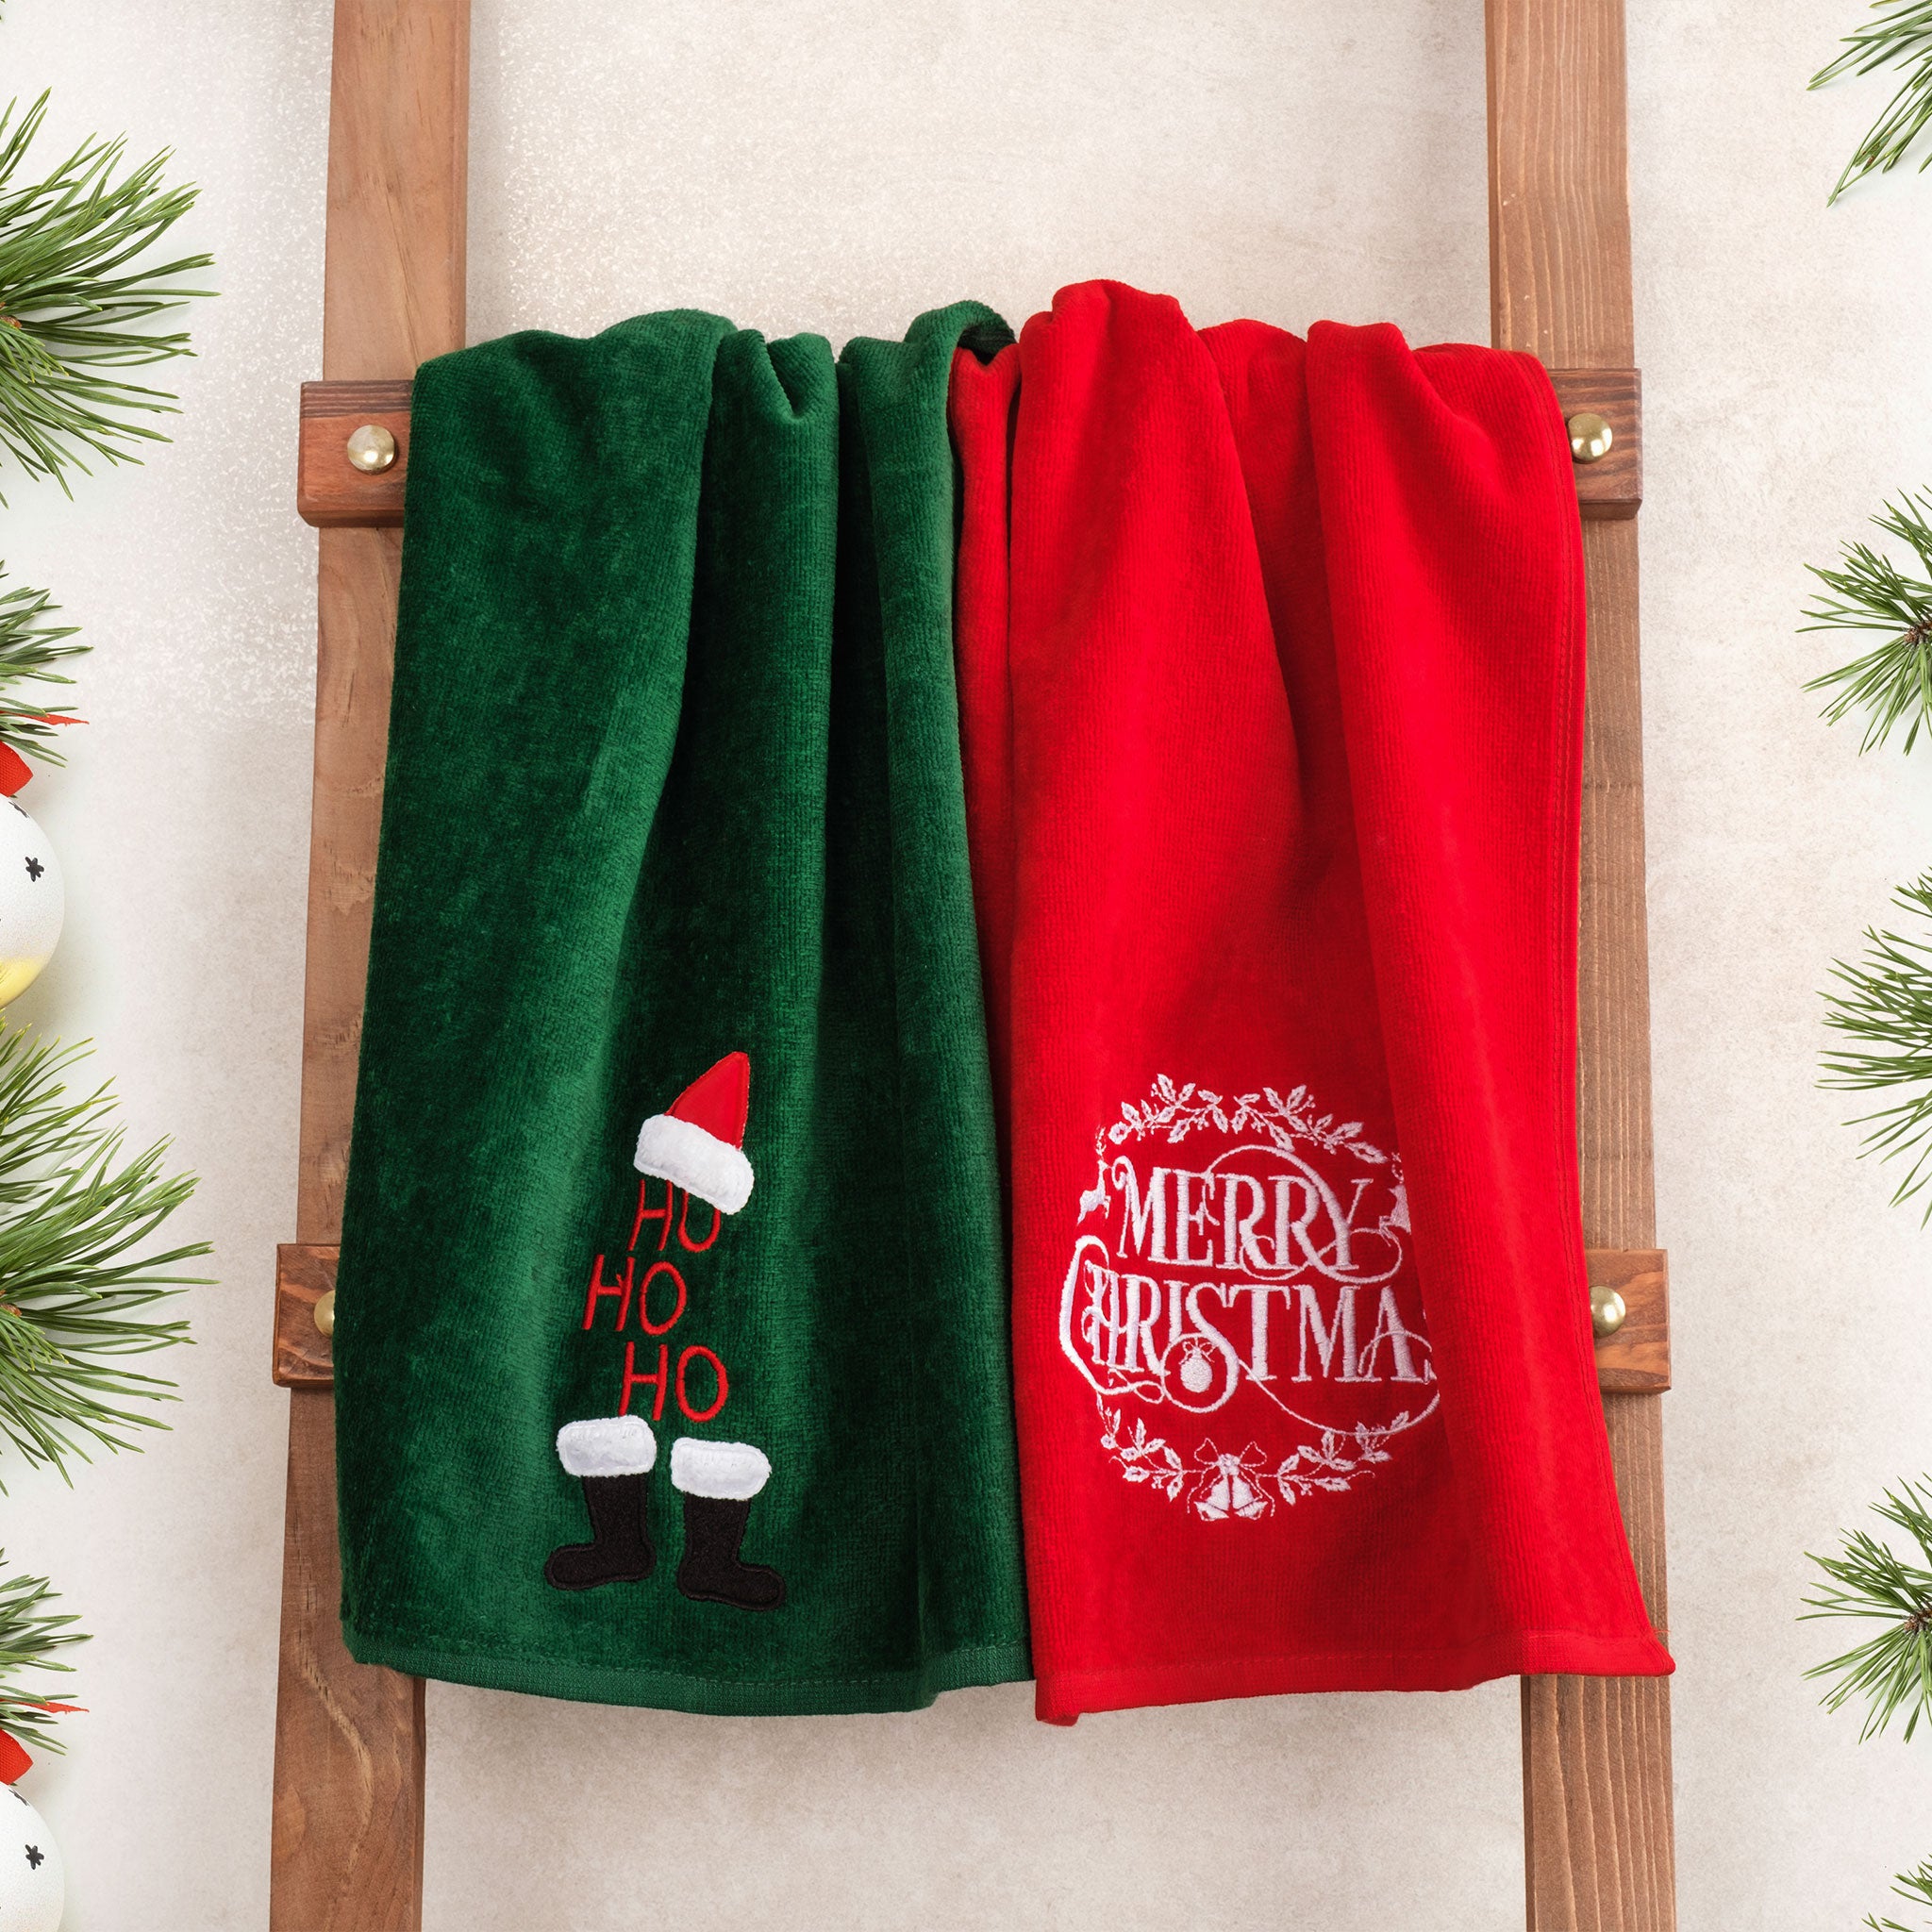 American Soft Linen - Christmas Towels 2 Packed Embroidered Towels for Decor Xmas - Merry-Hoho - 3